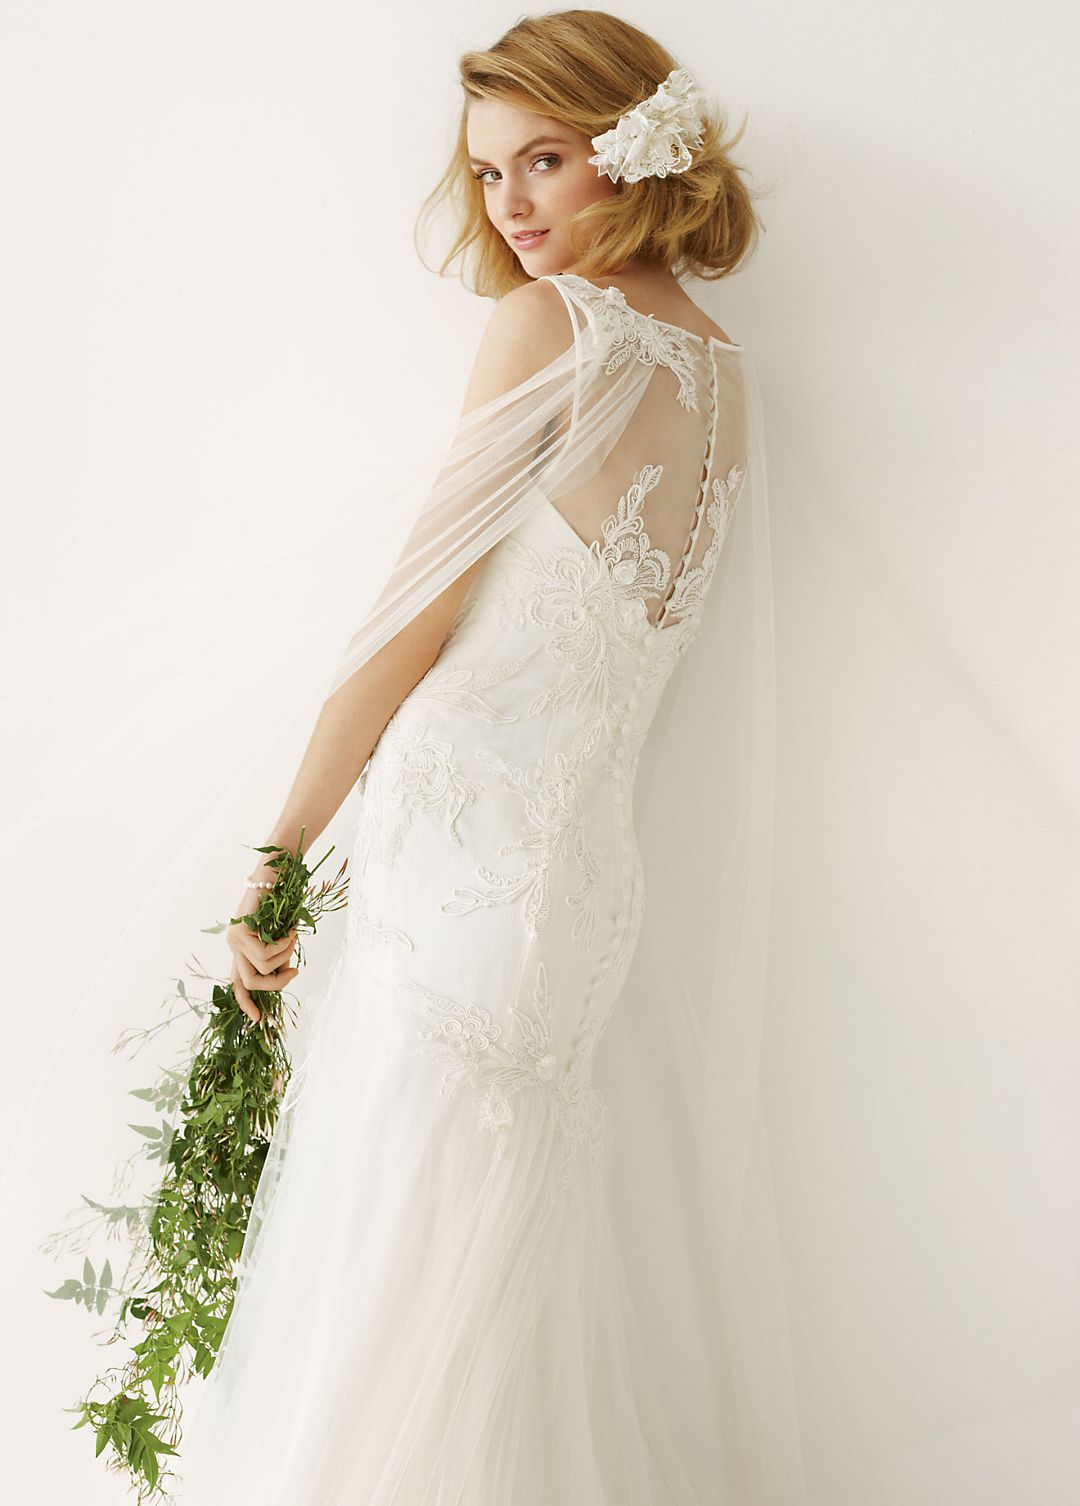 Tulle Gown with Illusion Neck and Lace Appliques Image 4